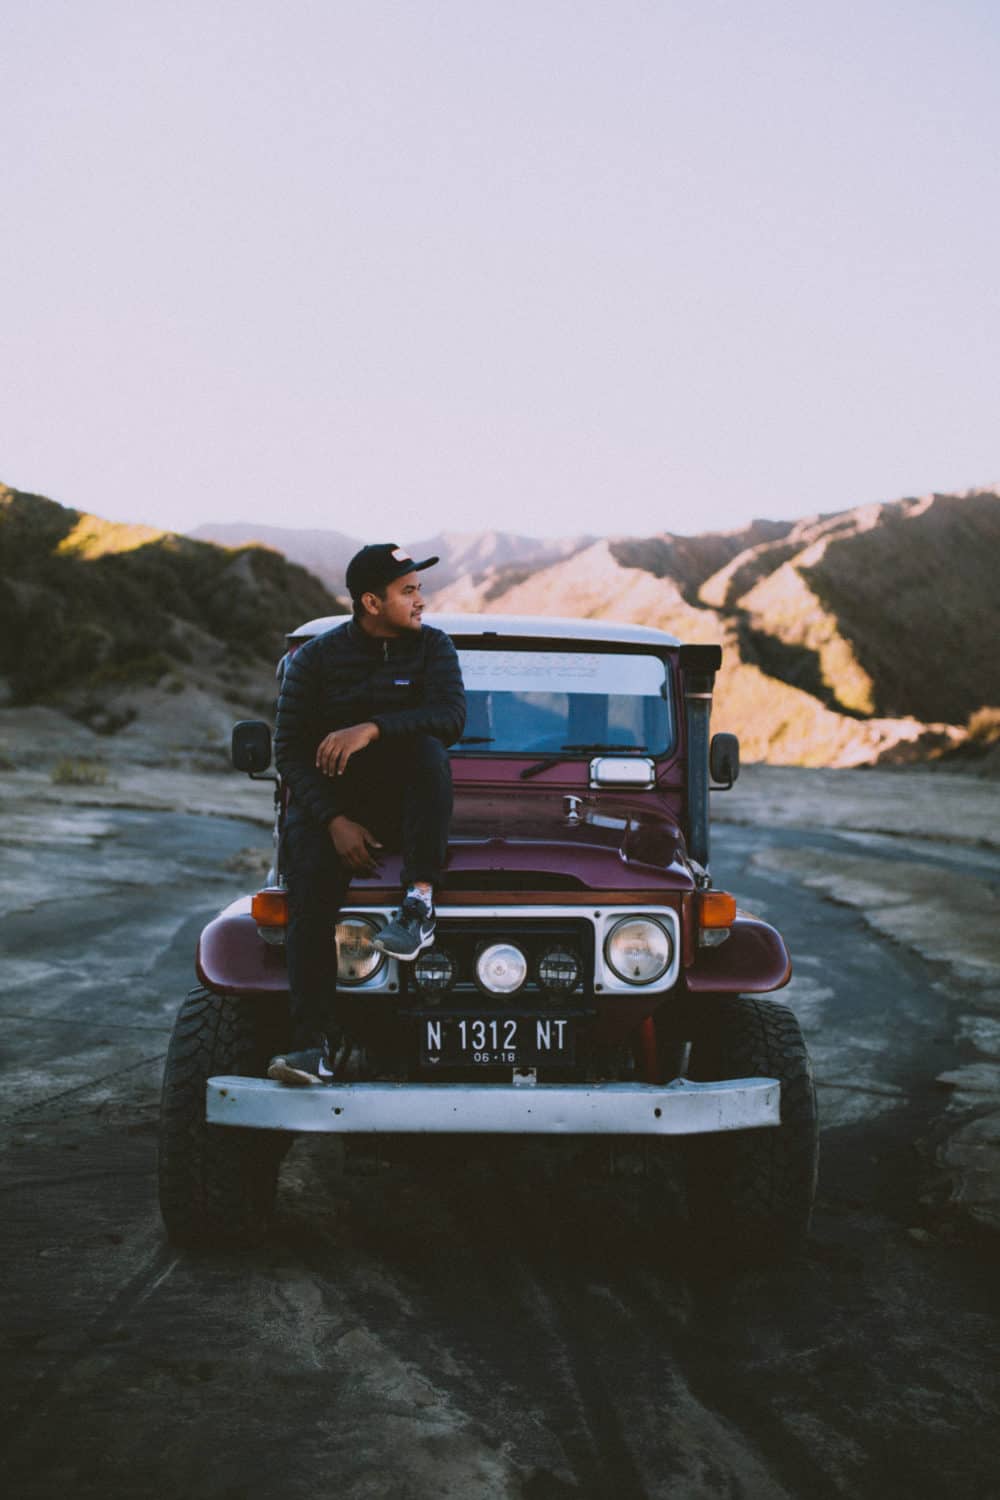 Berty sitting on a Jeep Mount Bromo